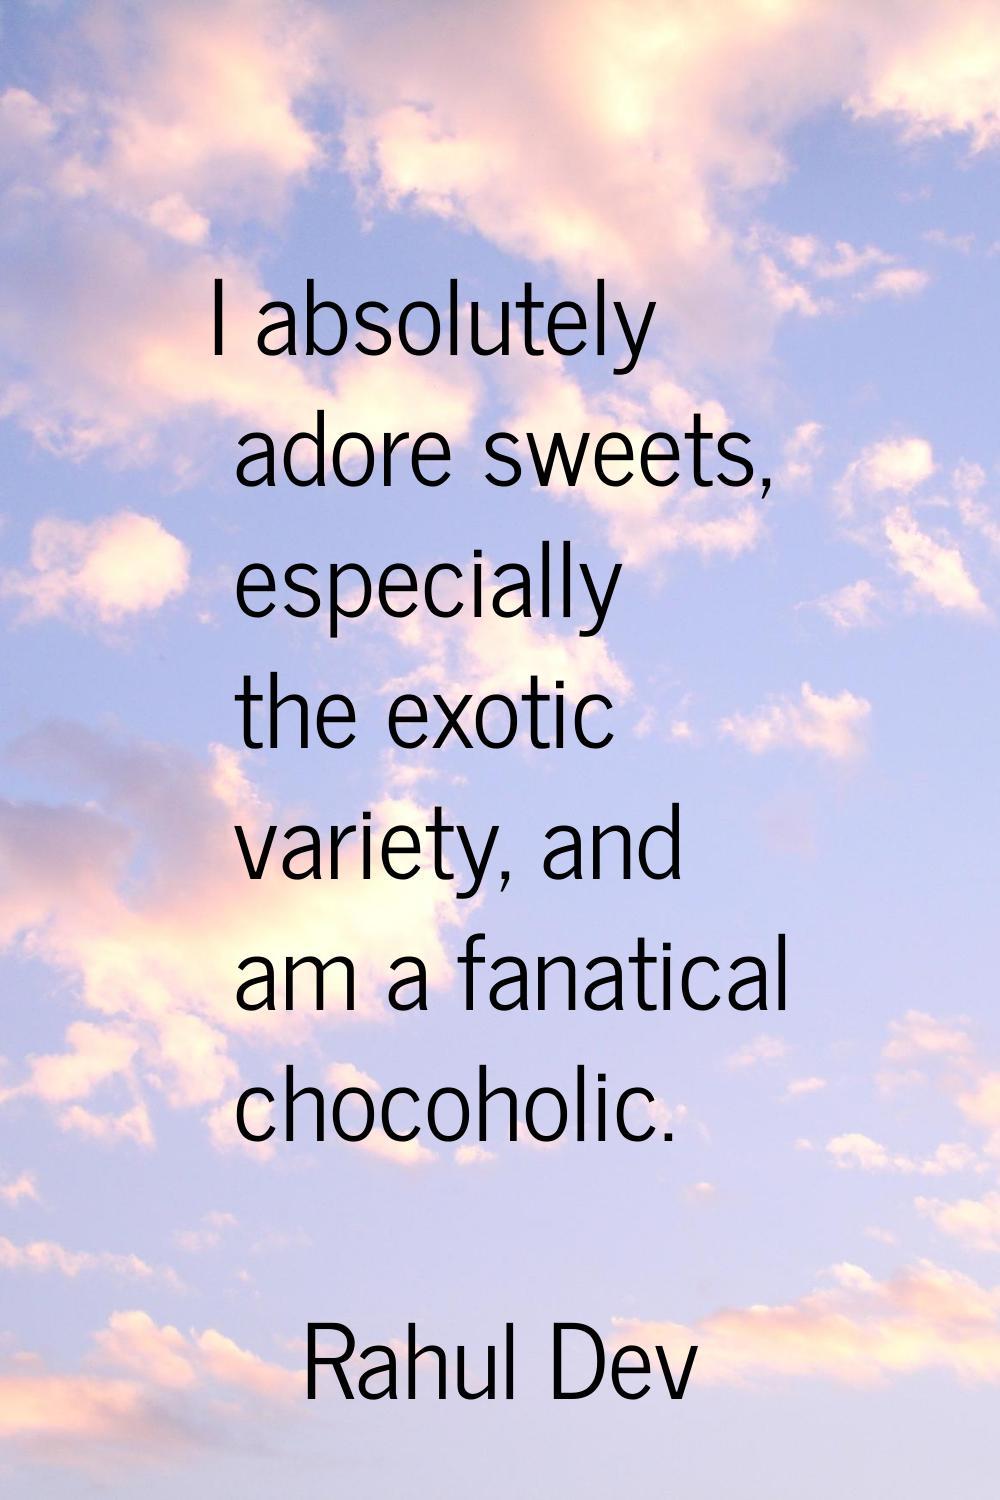 I absolutely adore sweets, especially the exotic variety, and am a fanatical chocoholic.